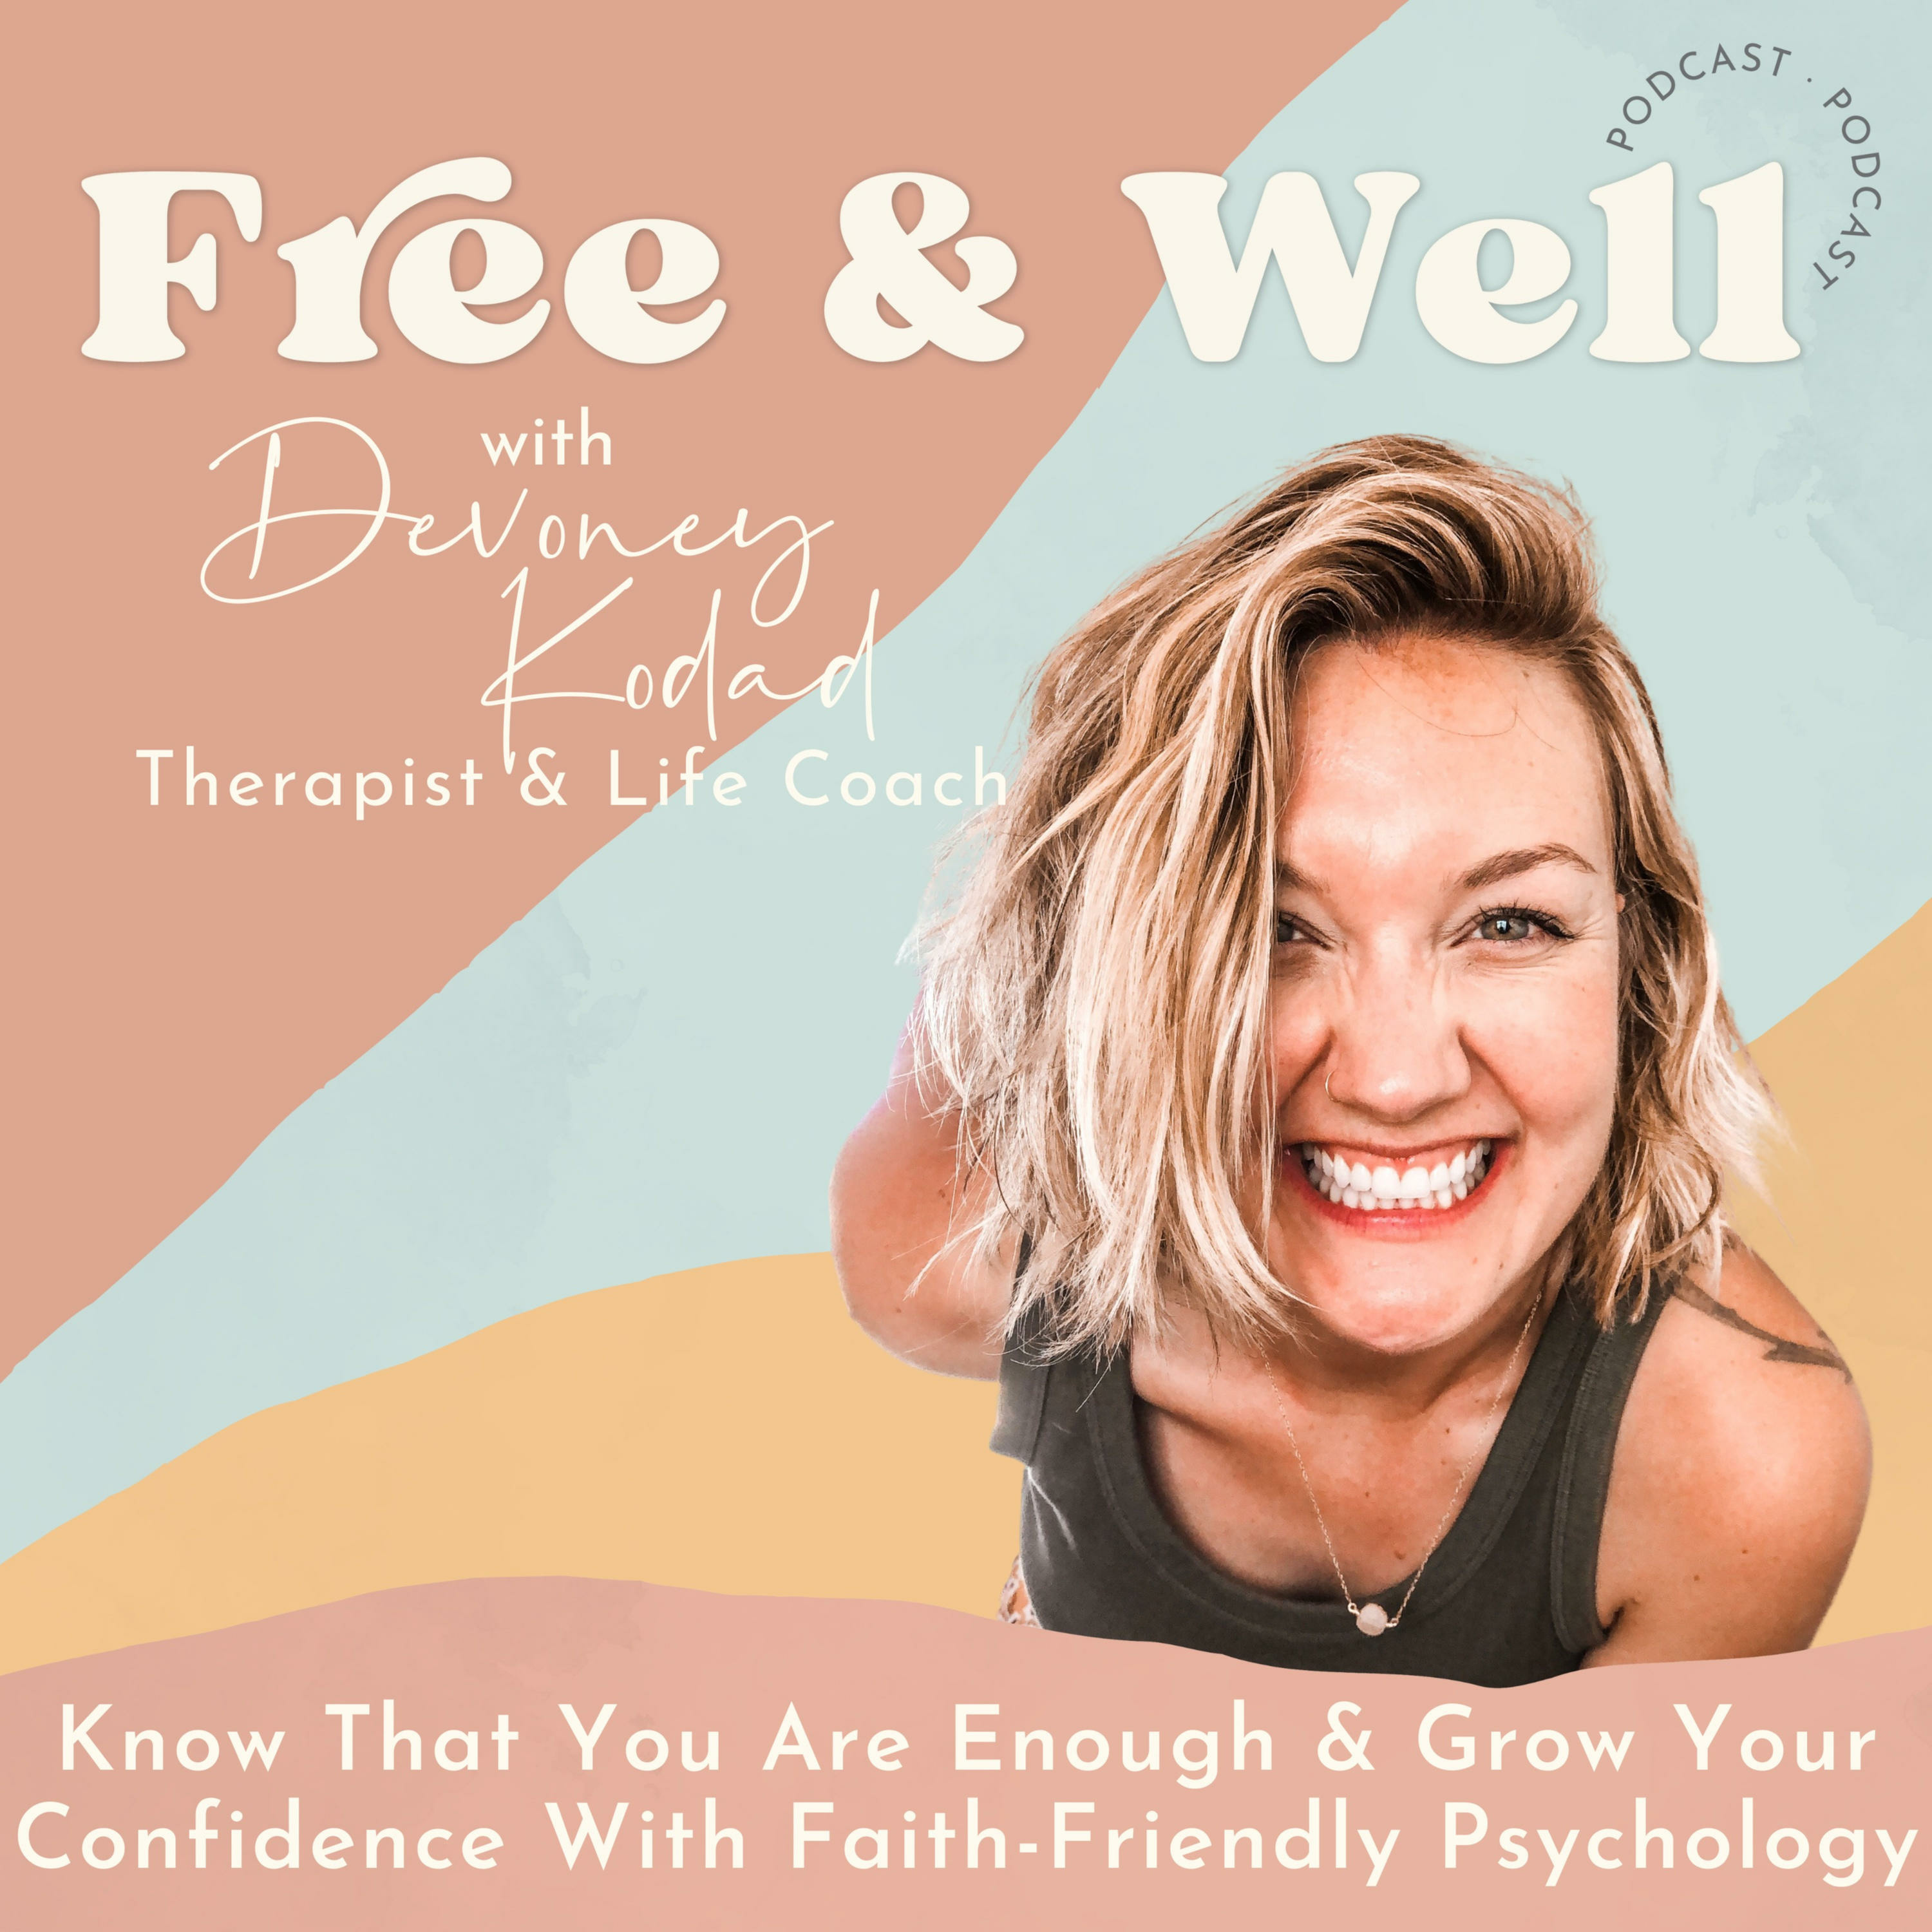 ✨LIVE WORKSHOP- Tired of Being So Hard On Yourself?! & 4 Journal Prompts To Help You Improve Your Self Talk, Grow Your Self Compassion, & Befriend Your Inner Critic in a Faith & Psychology Based Way